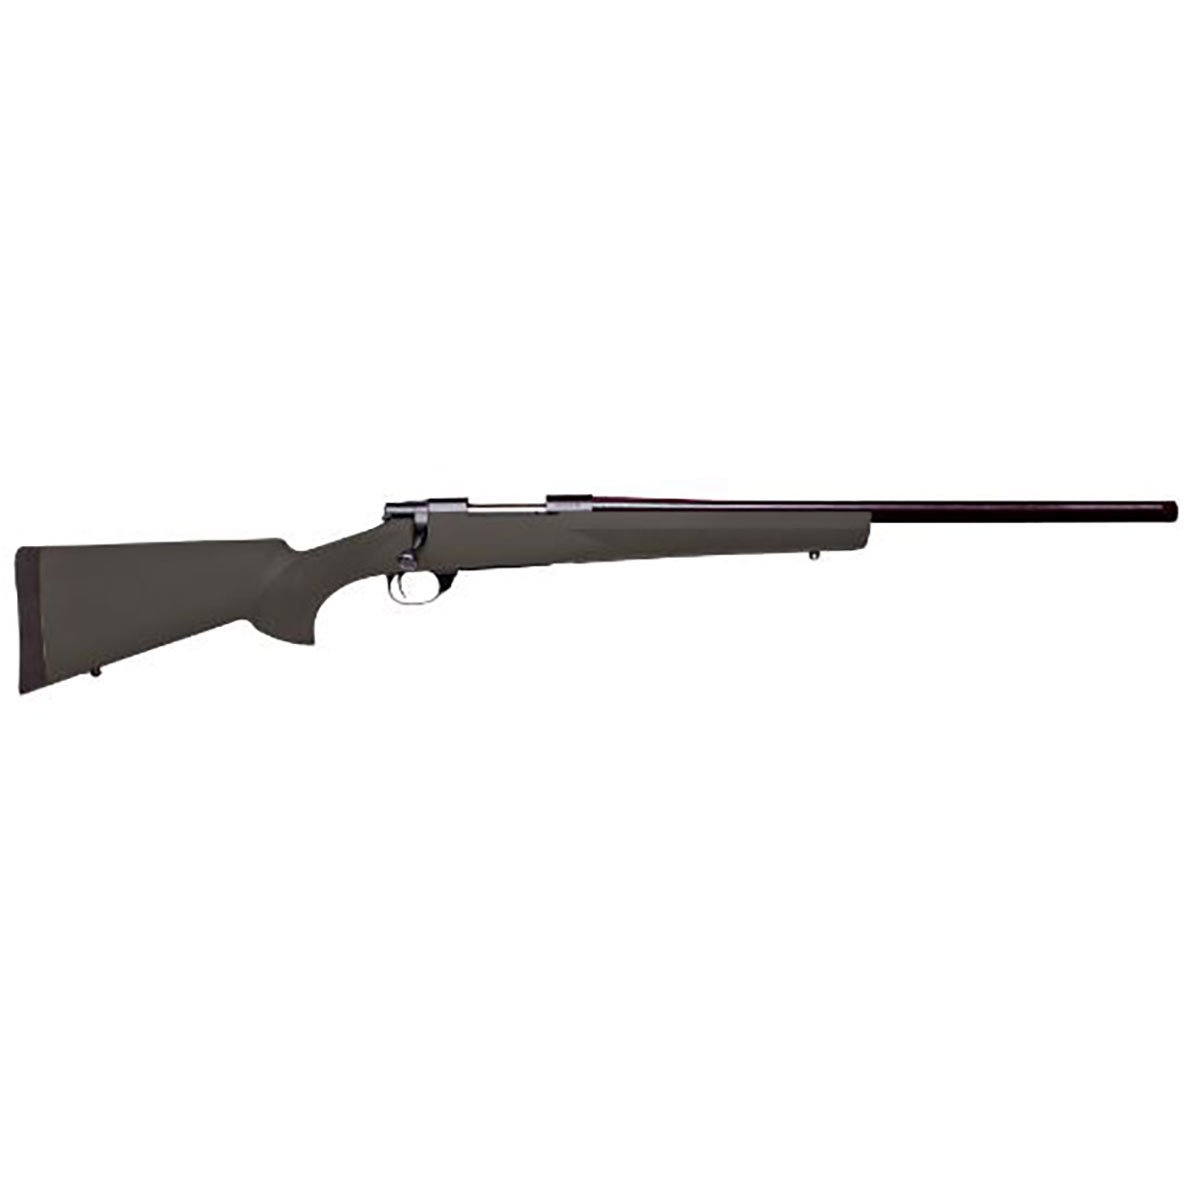 HOWA - M1500 HOGUE 308 WINCHESTER BOLT-ACTION RIFLE